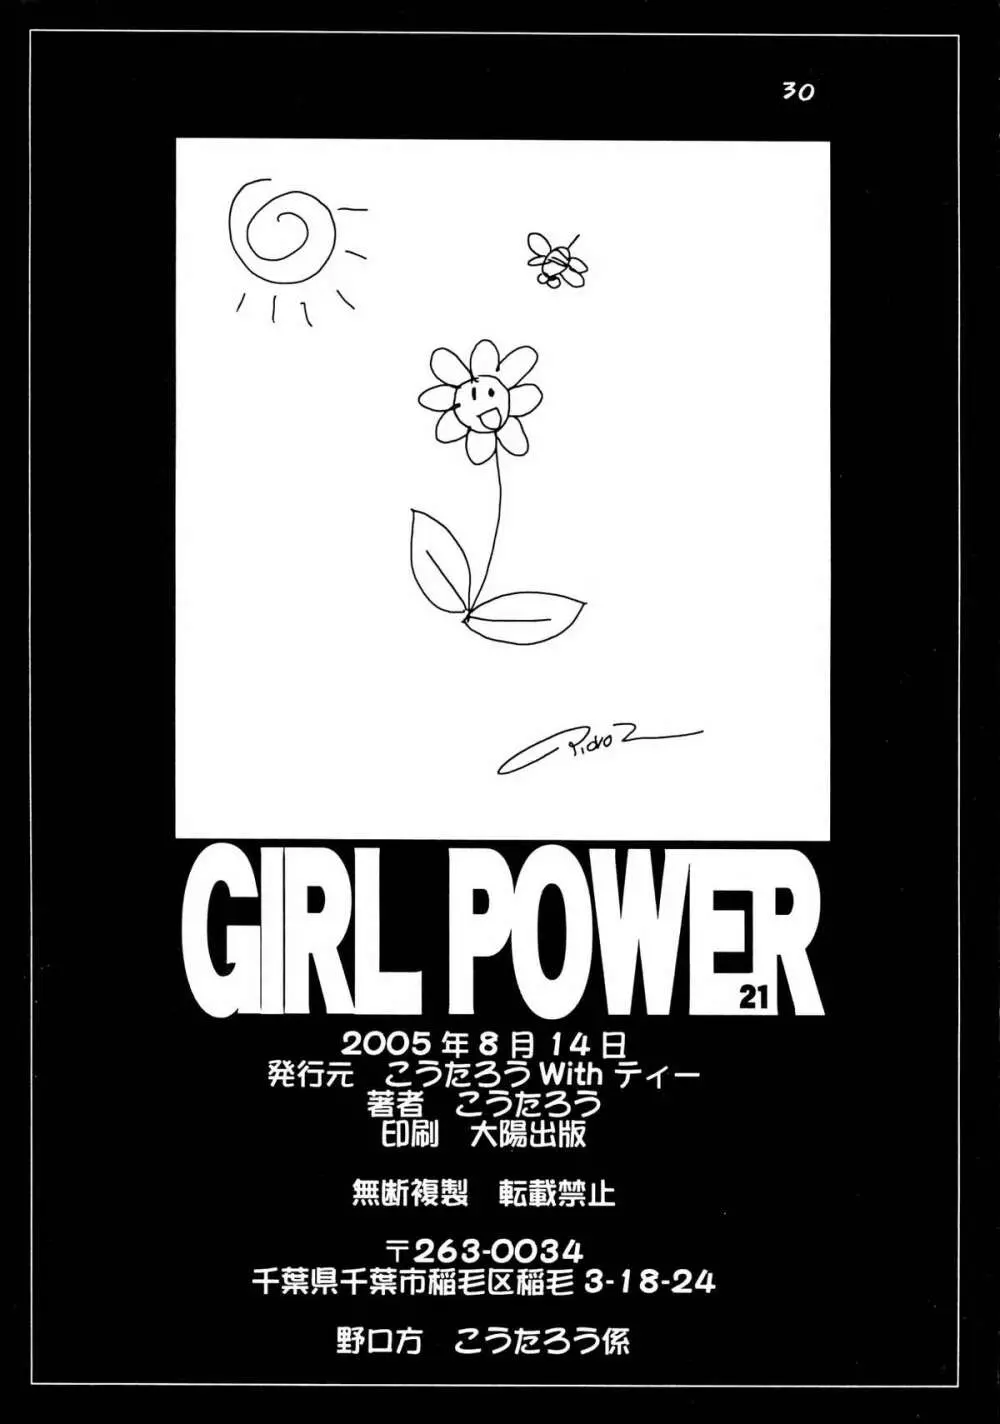 GIRL POWER vol.21 Page.30